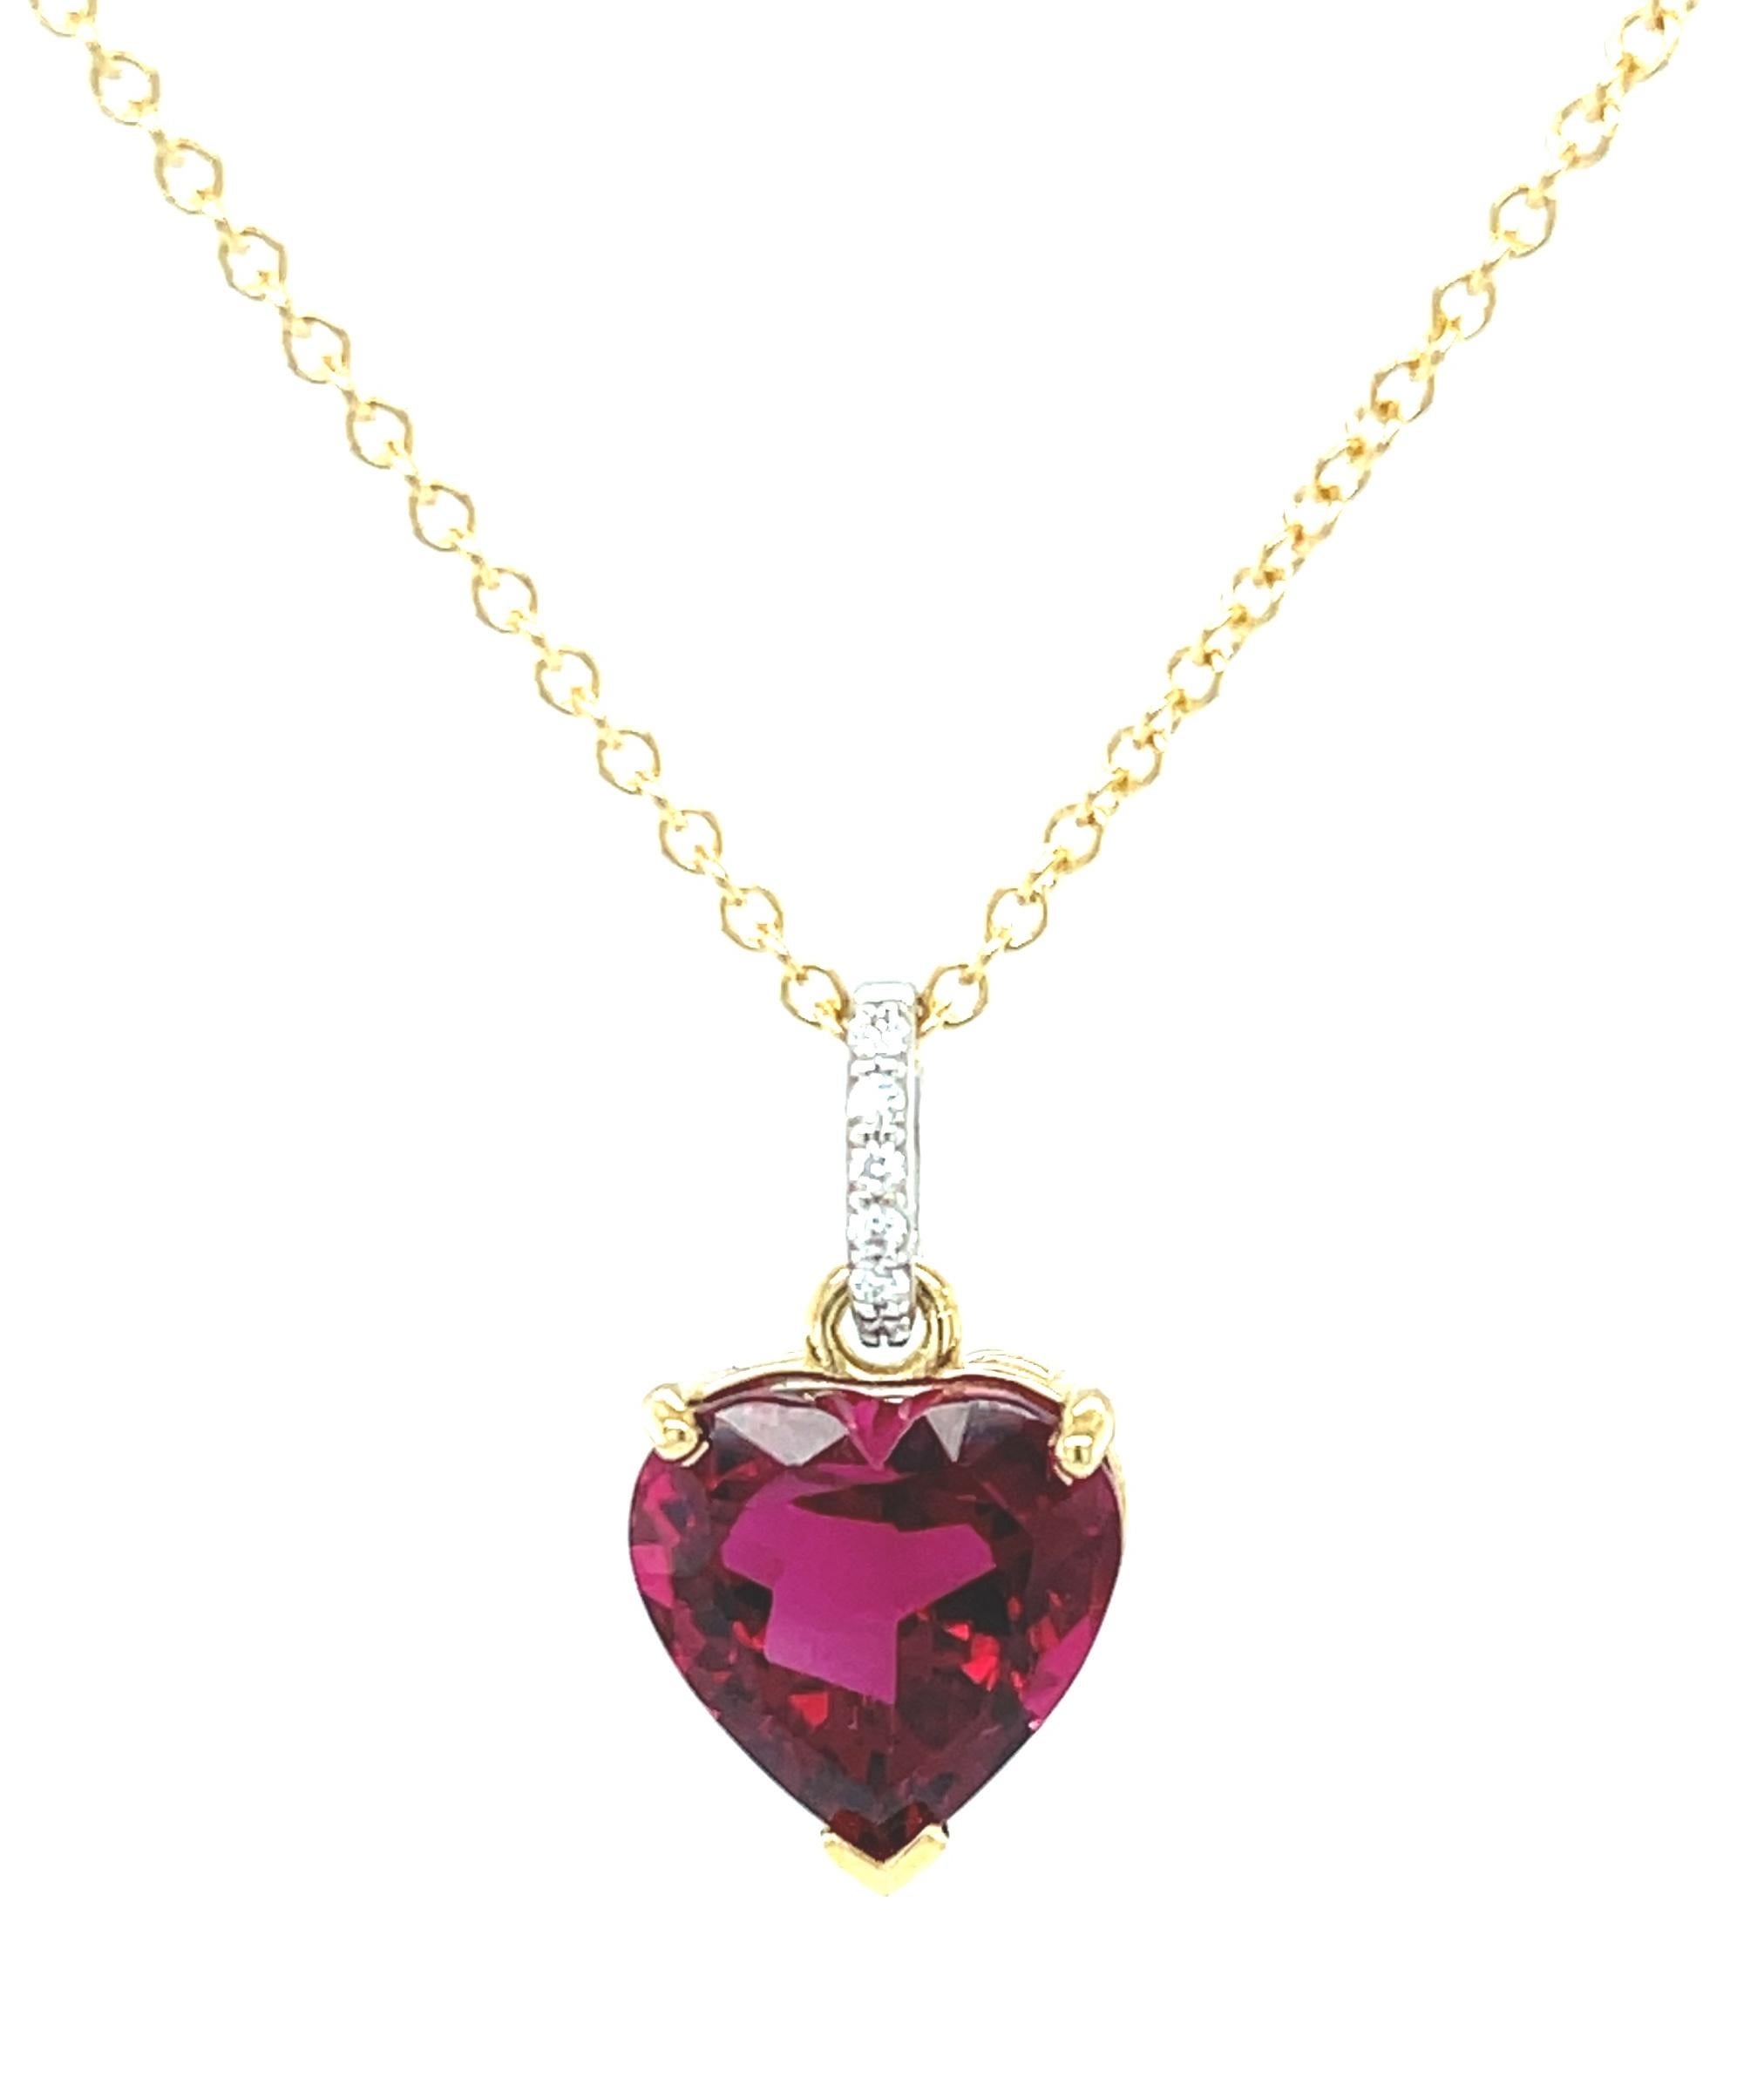 What better way to feel cherished than with a finest quality, heart-shaped gemstone and diamonds? This gorgeous necklace features a stunning 5.14 carat heart-shaped rubellite with breathtakingly rich color - a real gem! Handcrafted in 18k yellow